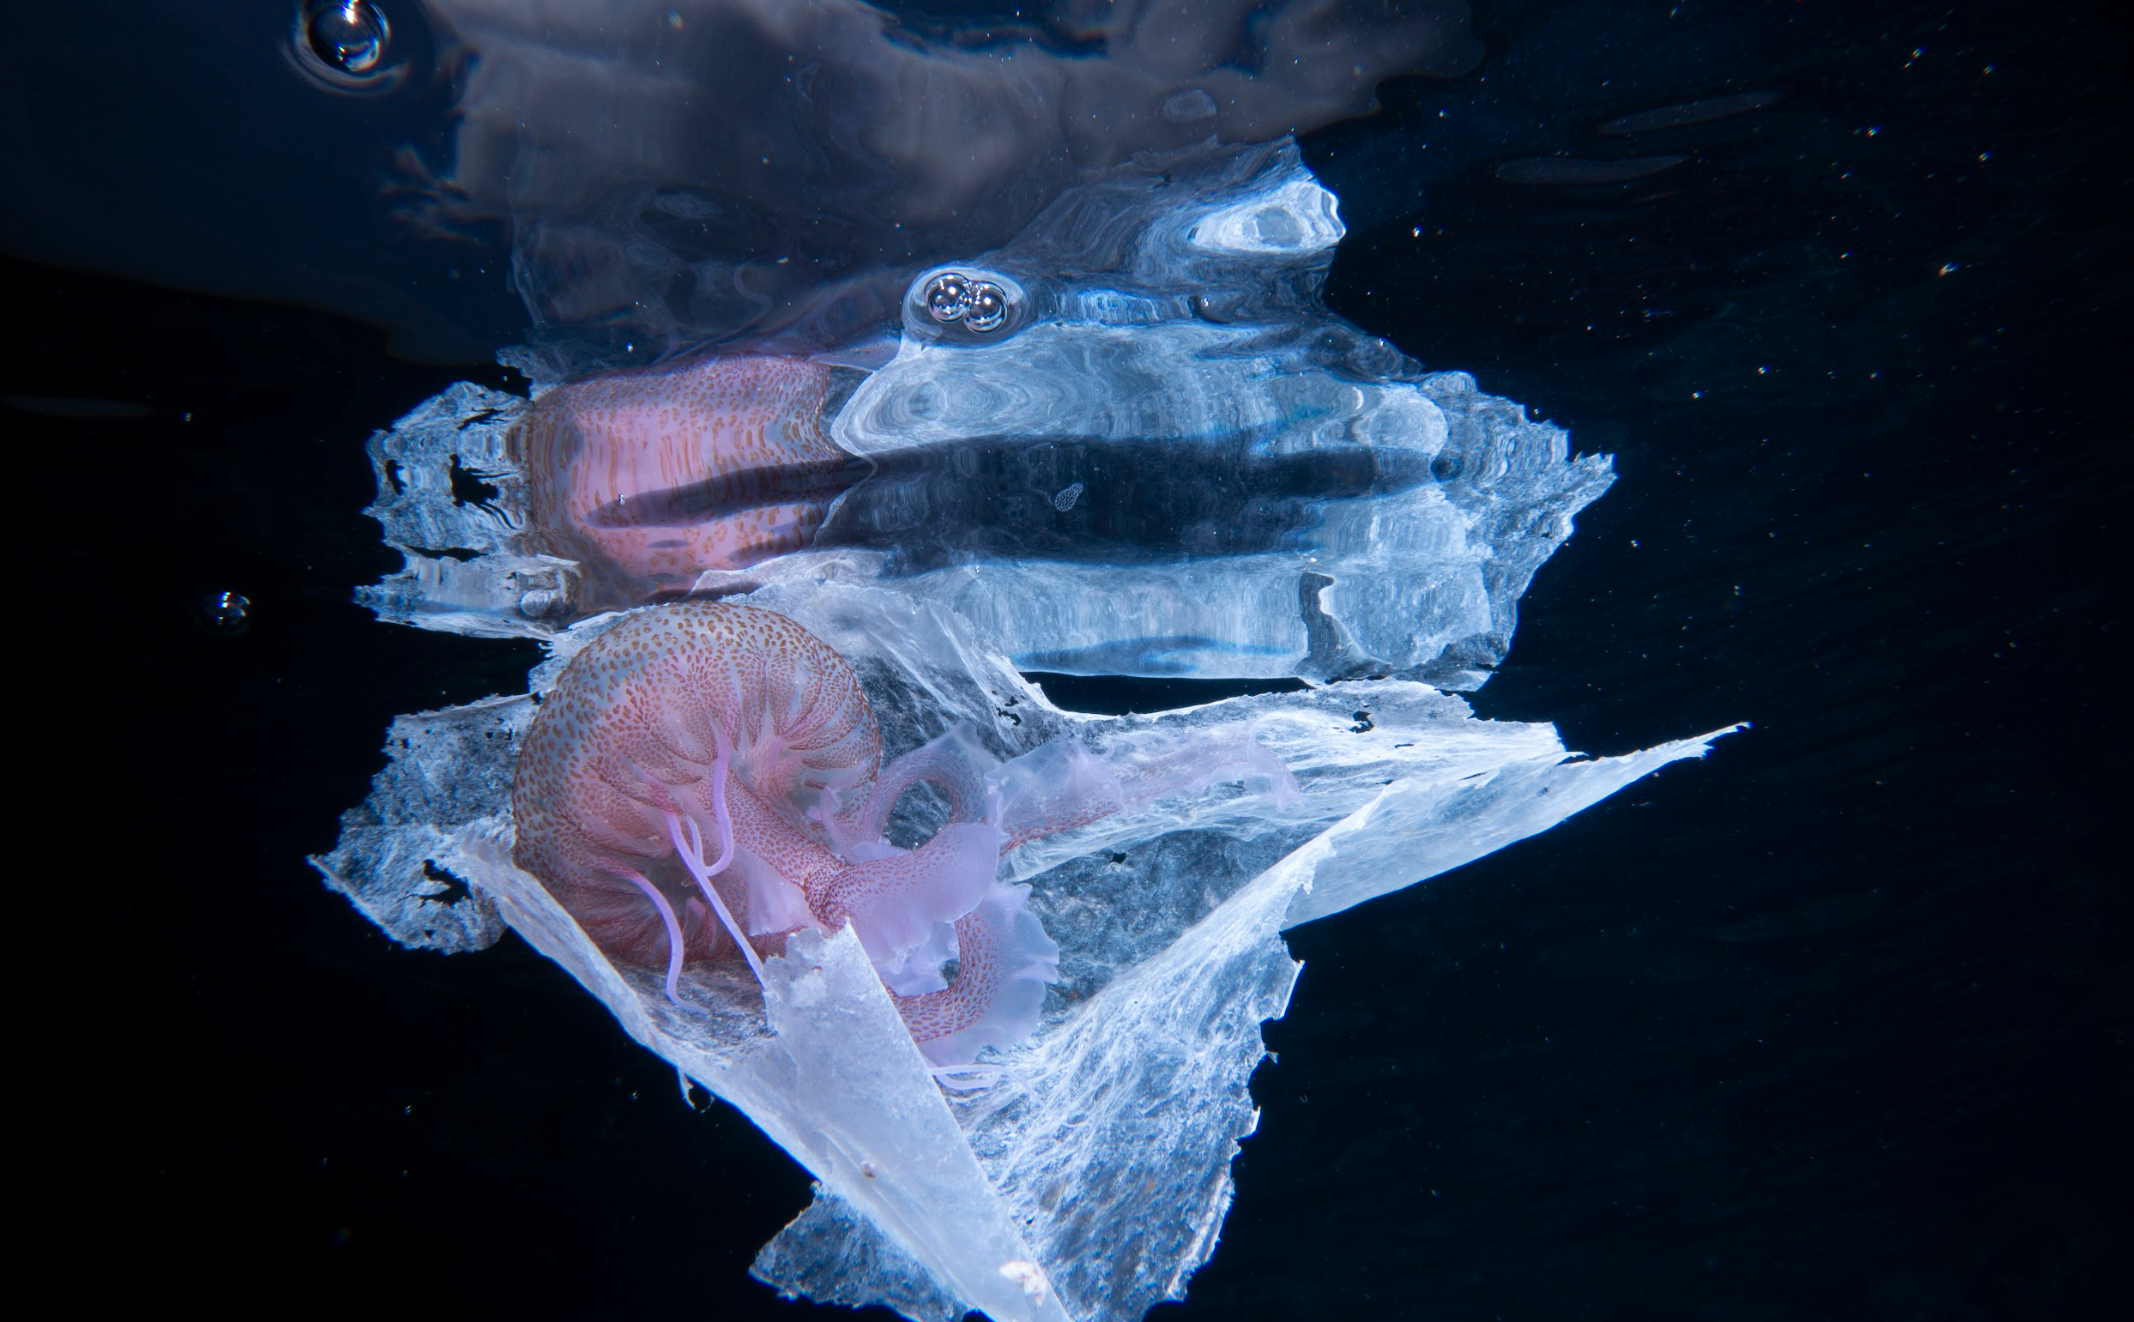 A jellyfish tangled in plastic film in waters off Sicily, Italy. Marine species are heavily impacted by plastic pollution